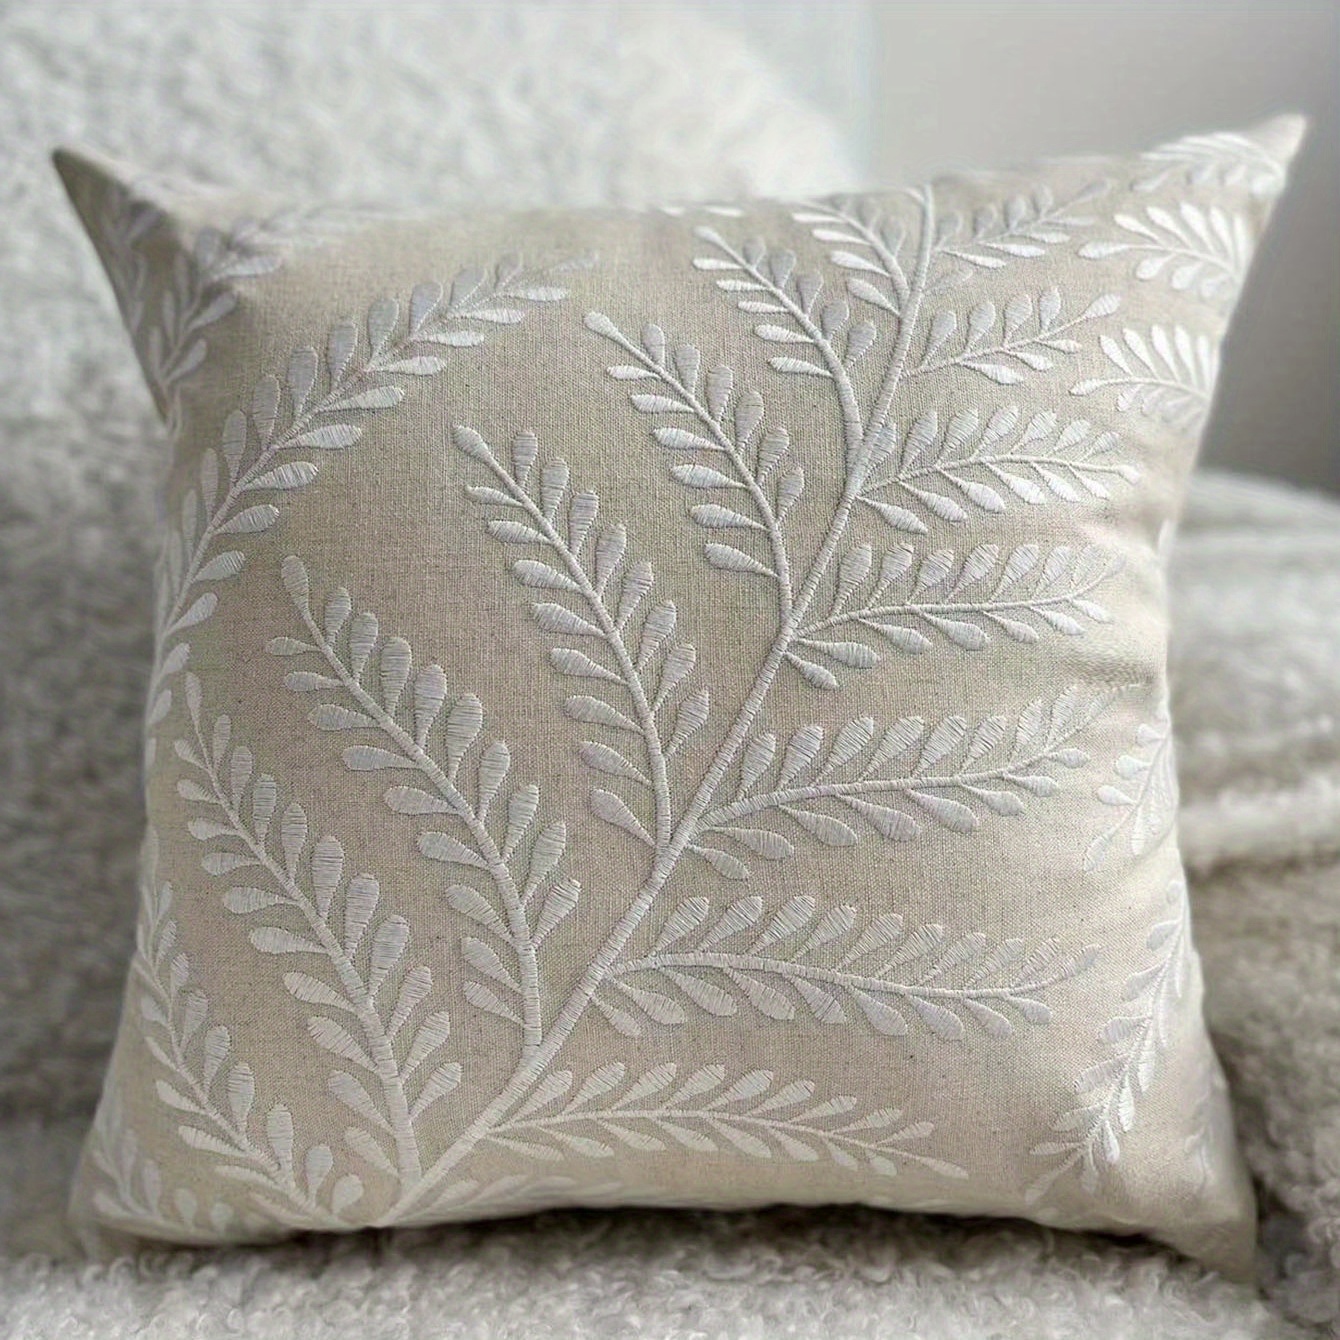 1pc Four Seasons Leaf Embroidery Pillow Cover - Soft and Stylish Home Decor for Living Room, Bed, Sofa, and Couch